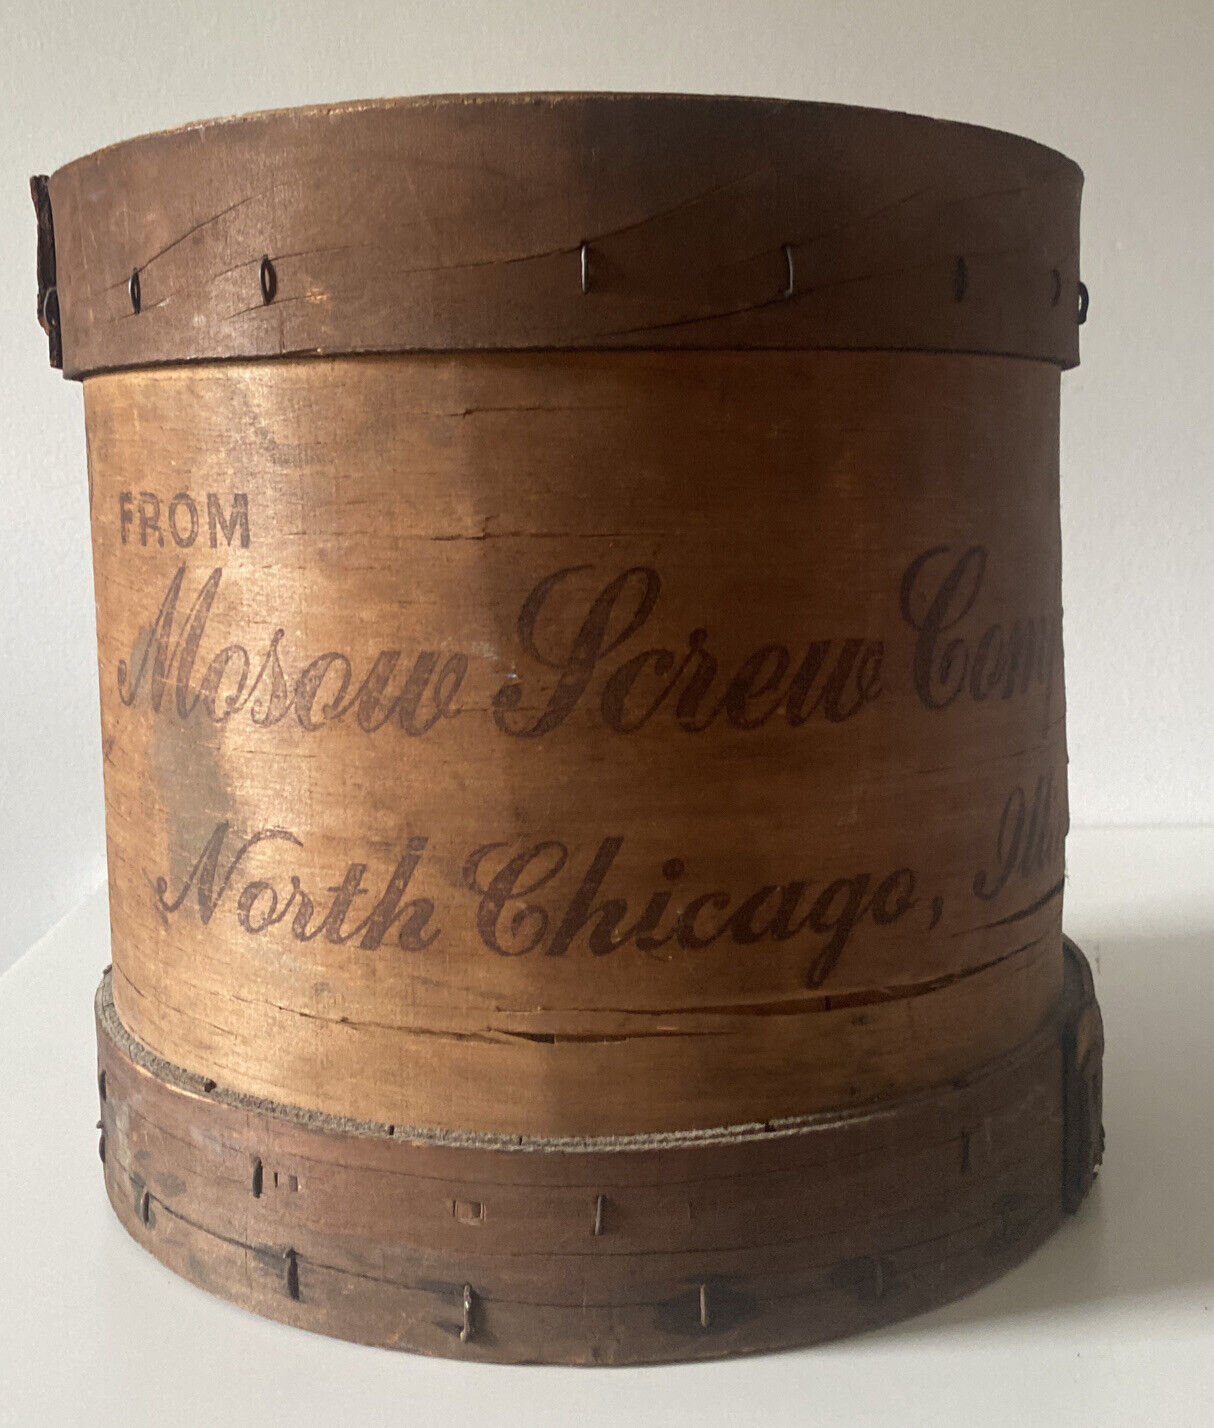 Antique Seymour & Peck Tu-Ply Wood Drum Barrel Moscow Screw Co. North Chicago